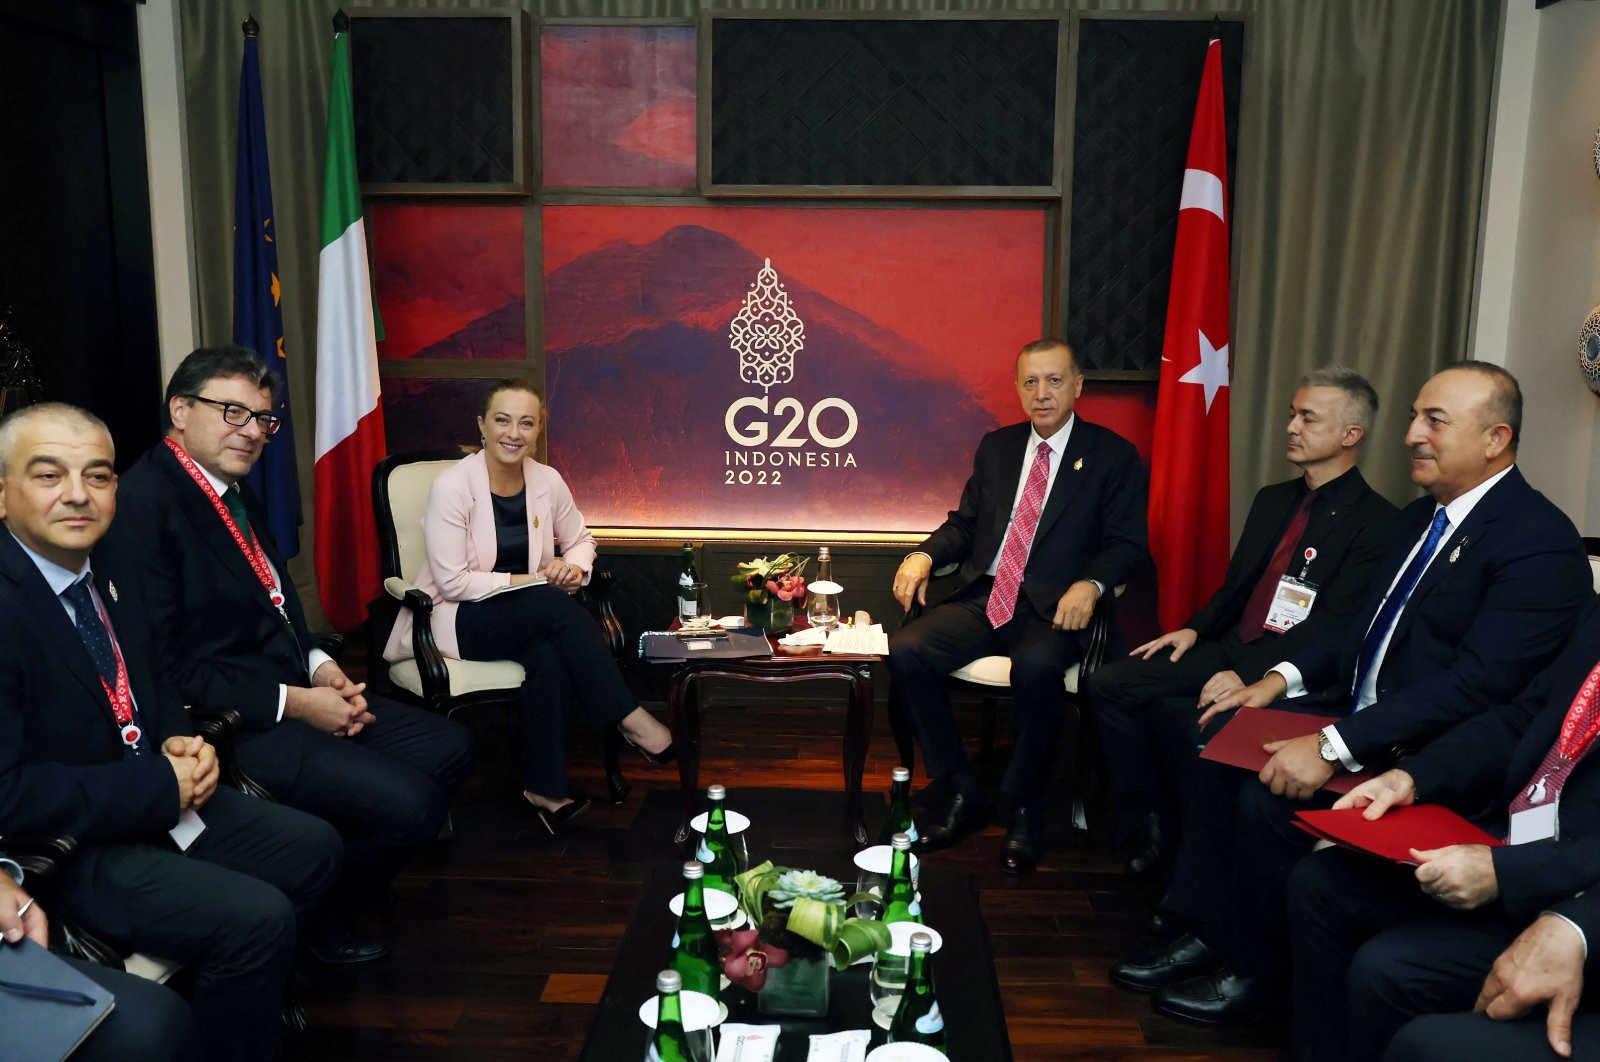 A handout picture taken and released by Turkish presidential press service on November 15, 2022 shows Turkish President Recep Tayyip Erdoğan (C, R) and Prime Minister of Italy Giorgia Meloni (C, L) posing with their delegations prior to their meeting as part of the 17th G20 leaders&#039; Summit in Bali&#039;s southern peninsula Nusa Dua. (Photo by Türkiye&#039;s Presidential Press Service / AFP)